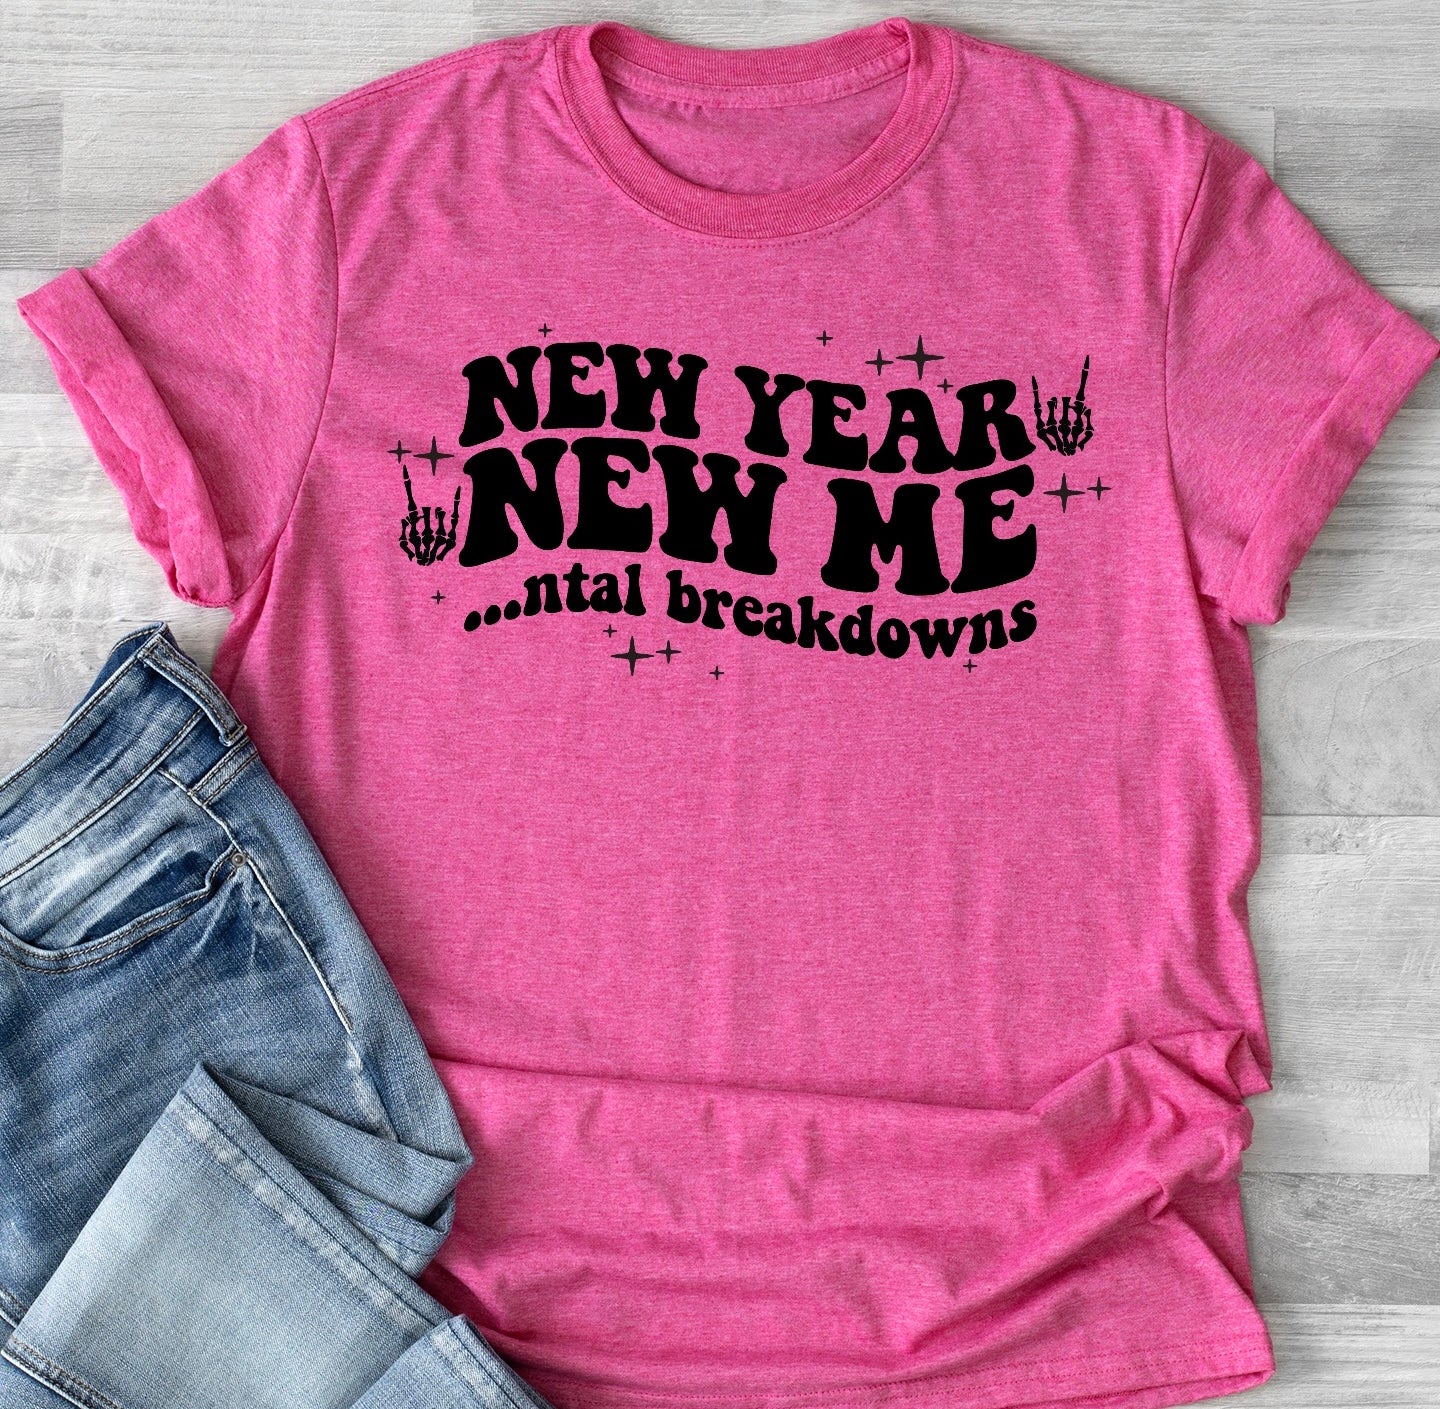 New Year New Mental Breakdowns Graphic Tee